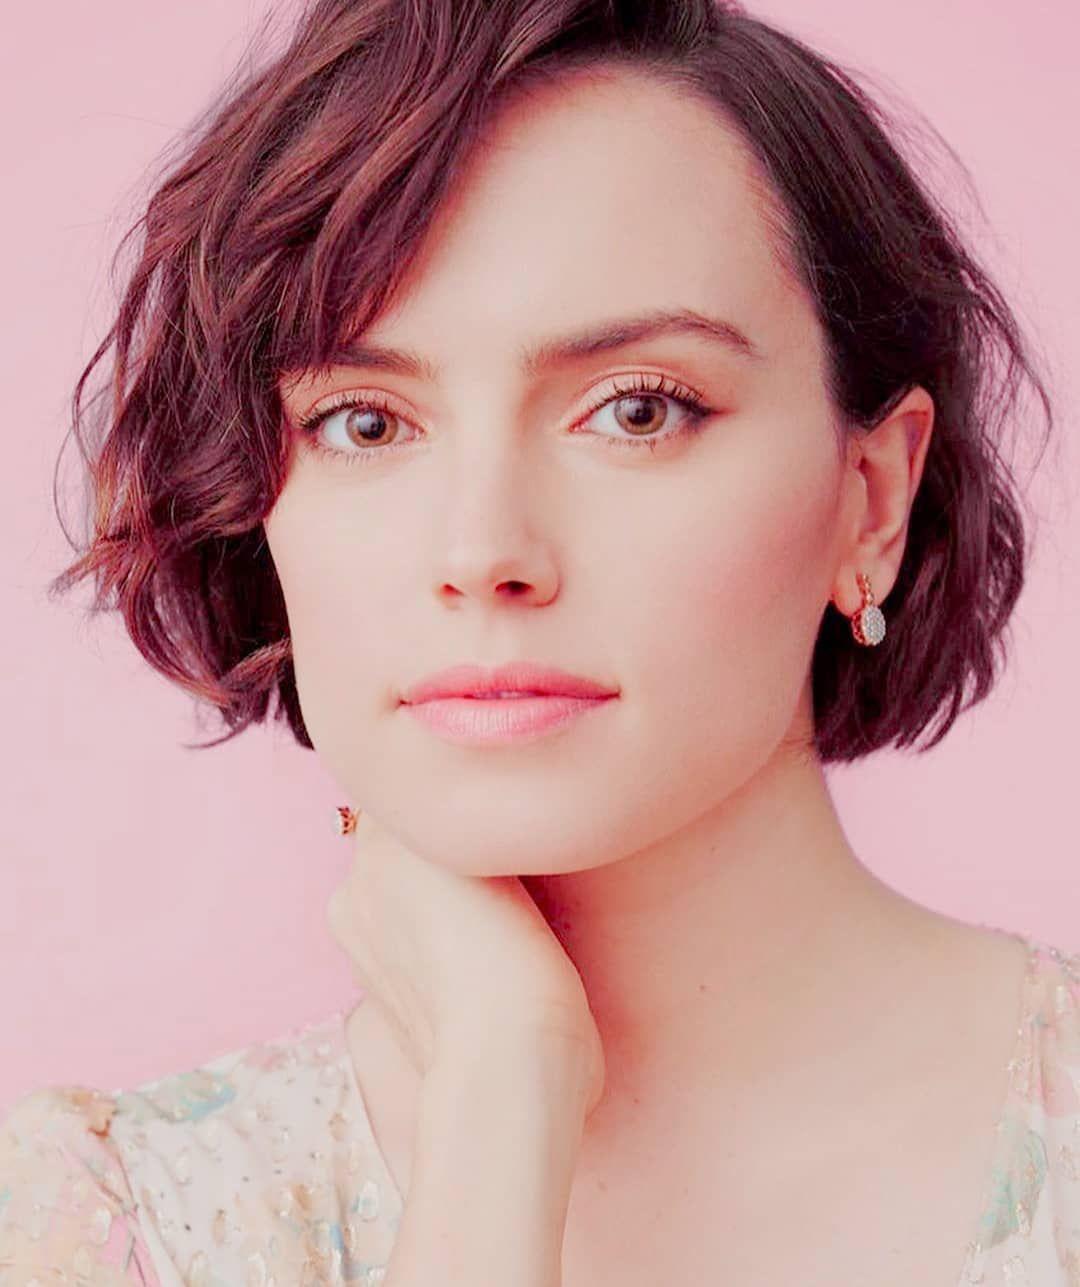 I want Daisy Ridley to stroke my hair and tell